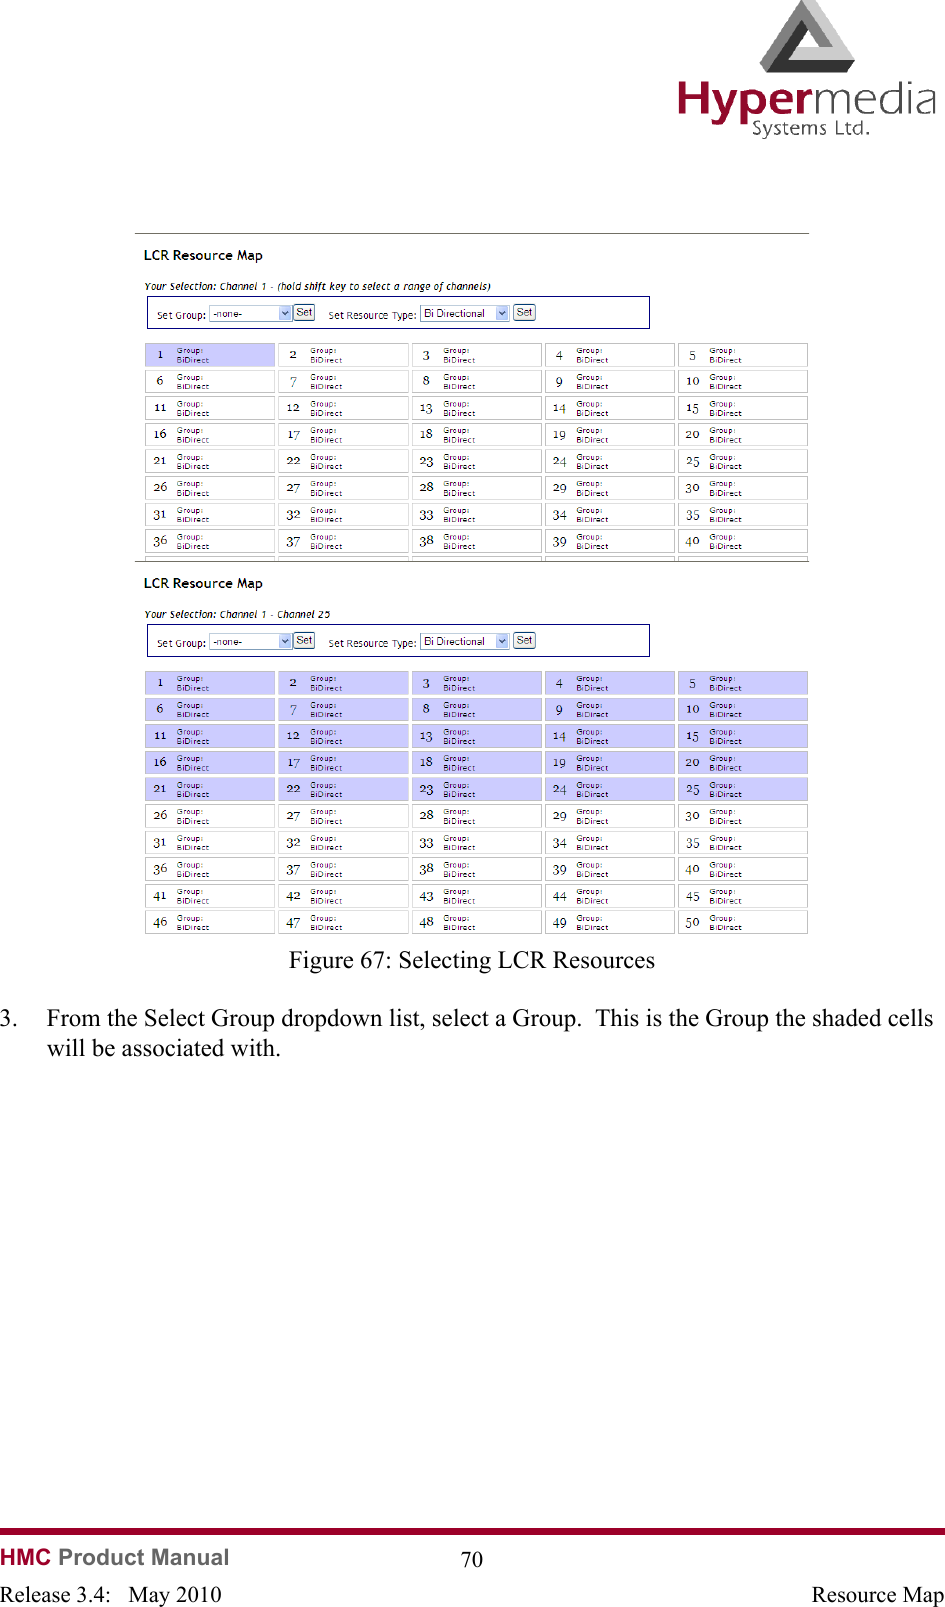   HMC Product Manual  70Release 3.4:   May 2010 Resource Map              Figure 67: Selecting LCR Resources3. From the Select Group dropdown list, select a Group.  This is the Group the shaded cells will be associated with.